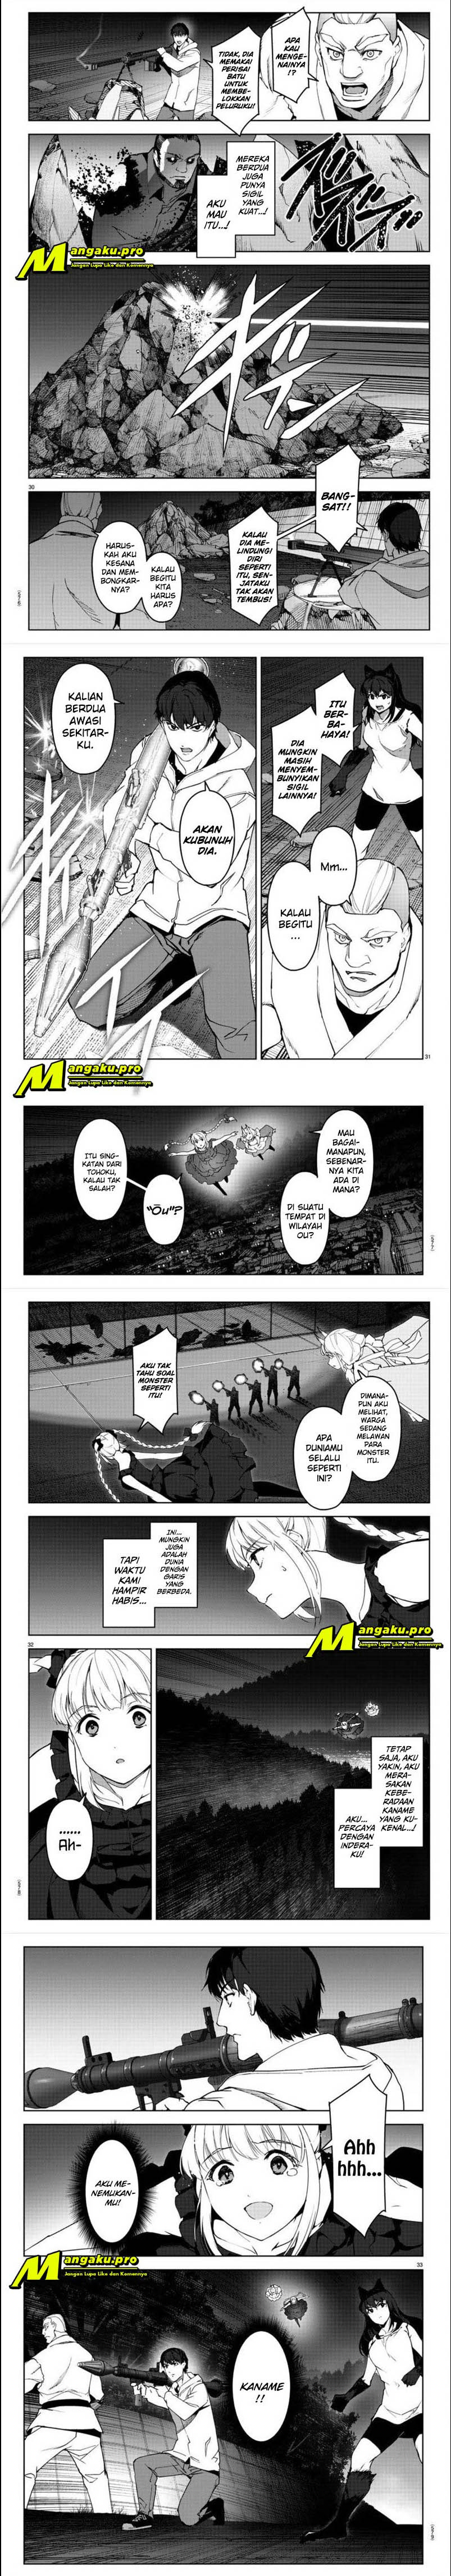 Darwin’s Game Chapter 92.2